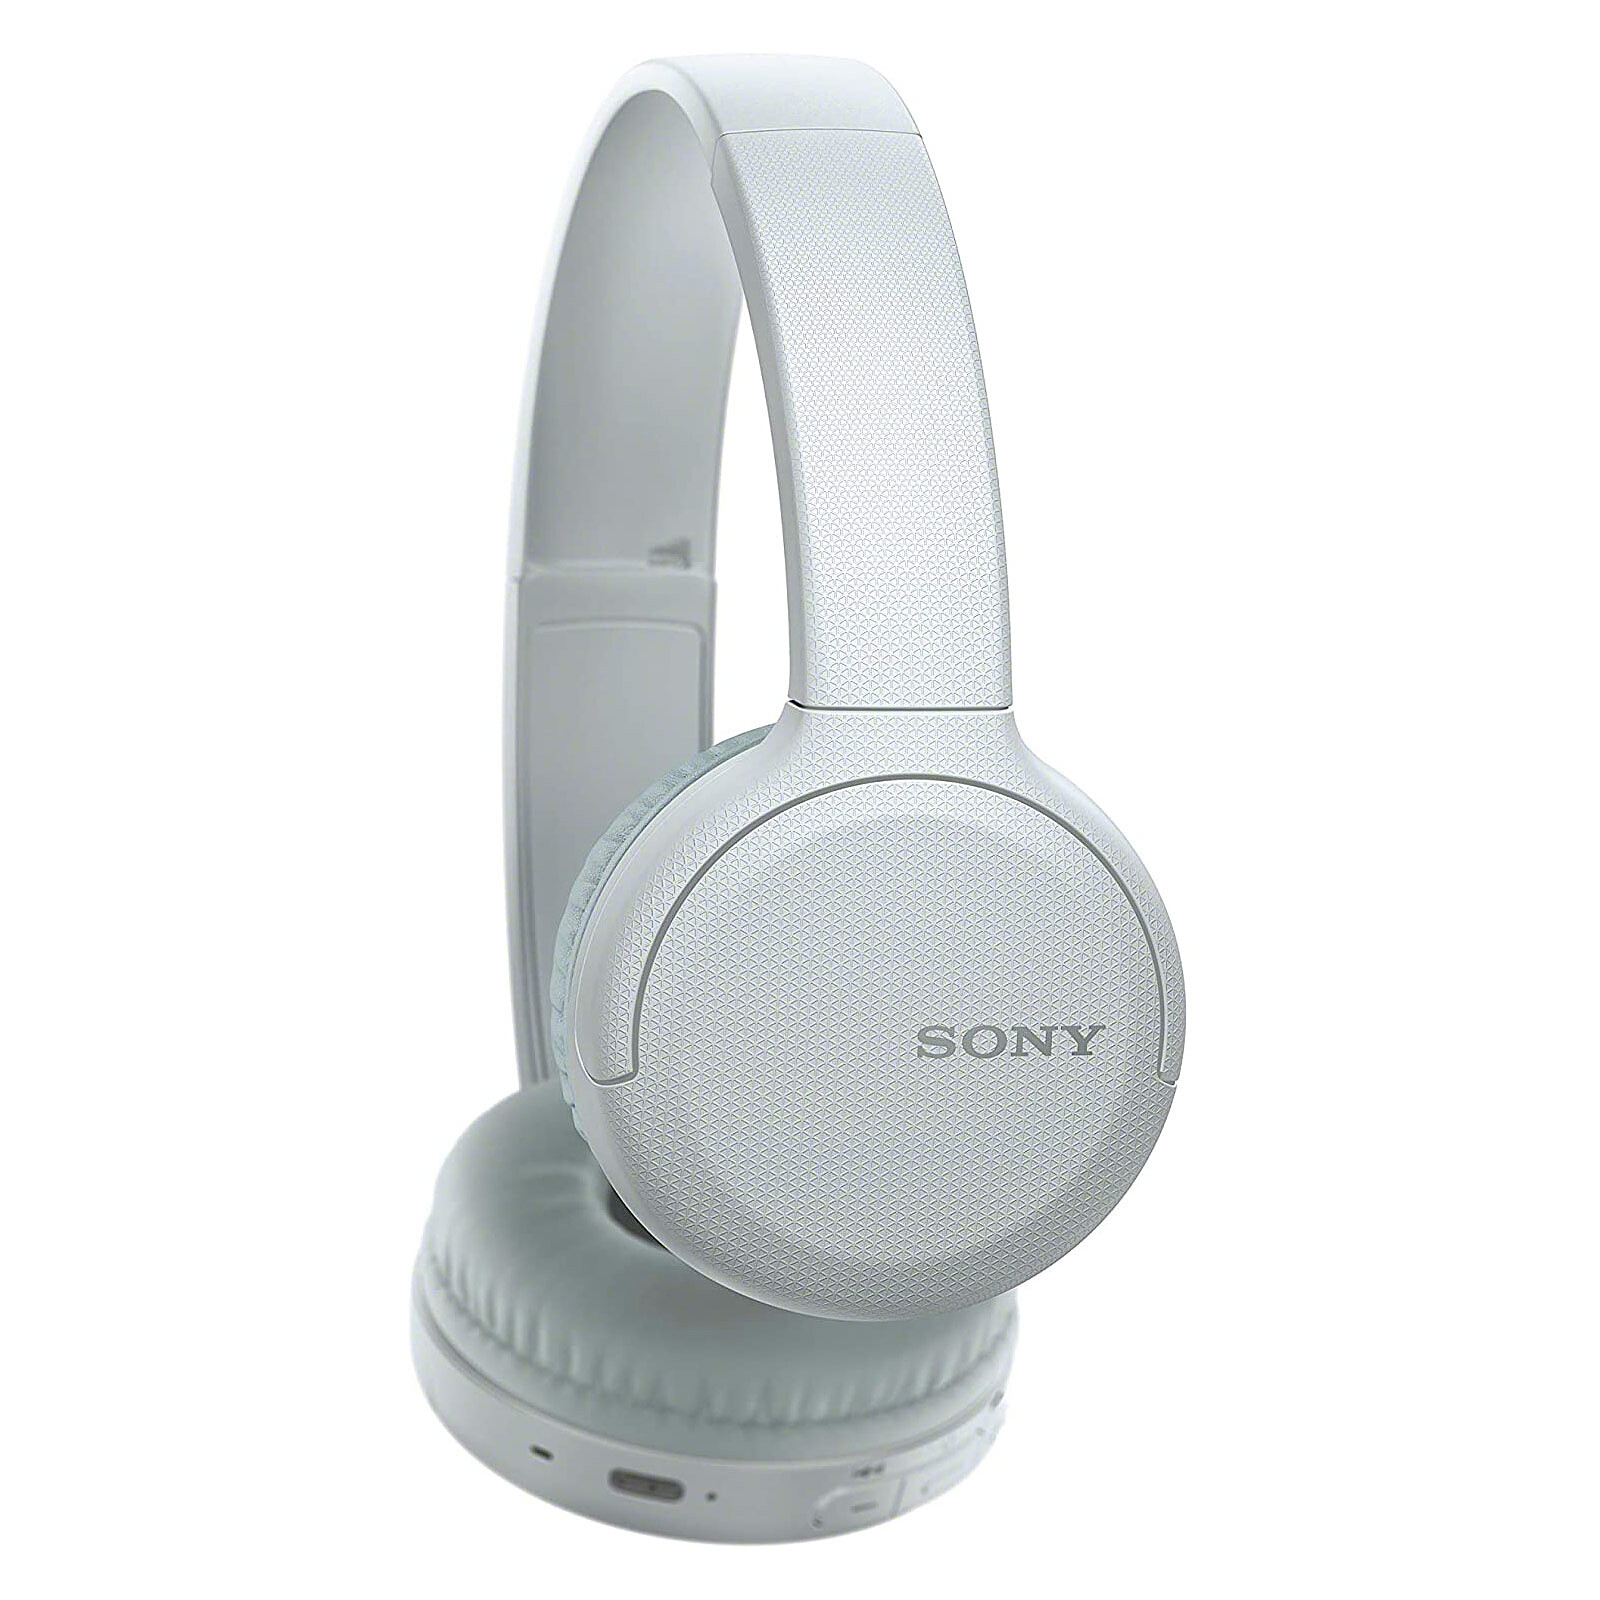 Sony WH-CH510 White - Headphones - LDLC 3-year warranty